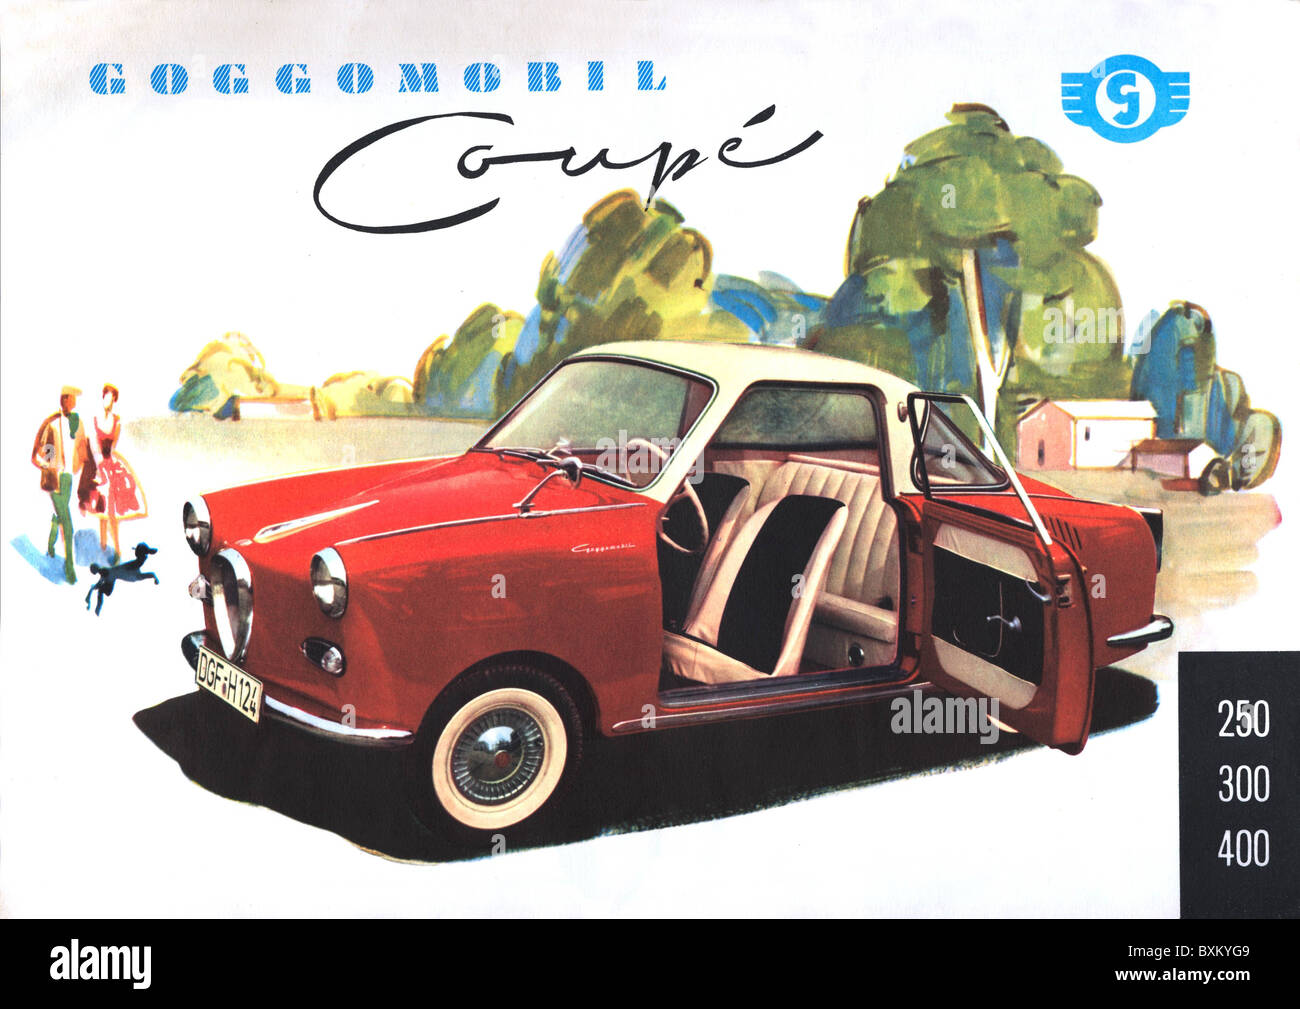 transport / transportation, car, vehicle variants, Goggomobil Coupe TS 400, made by Hans Glas GmbH, Dingolfing, Bavaria, Upper Bavaria, Germany, 1956, 1950s, 50s, 20th century, historic, historical, German, small car, Goggo, four-seater, four-seaters, two-cylinder engine, two-cylinder engines, economic miracle, economic miracles, excursion, outing, short trip, excursions, outings, short trips, people, Additional-Rights-Clearences-Not Available Stock Photo